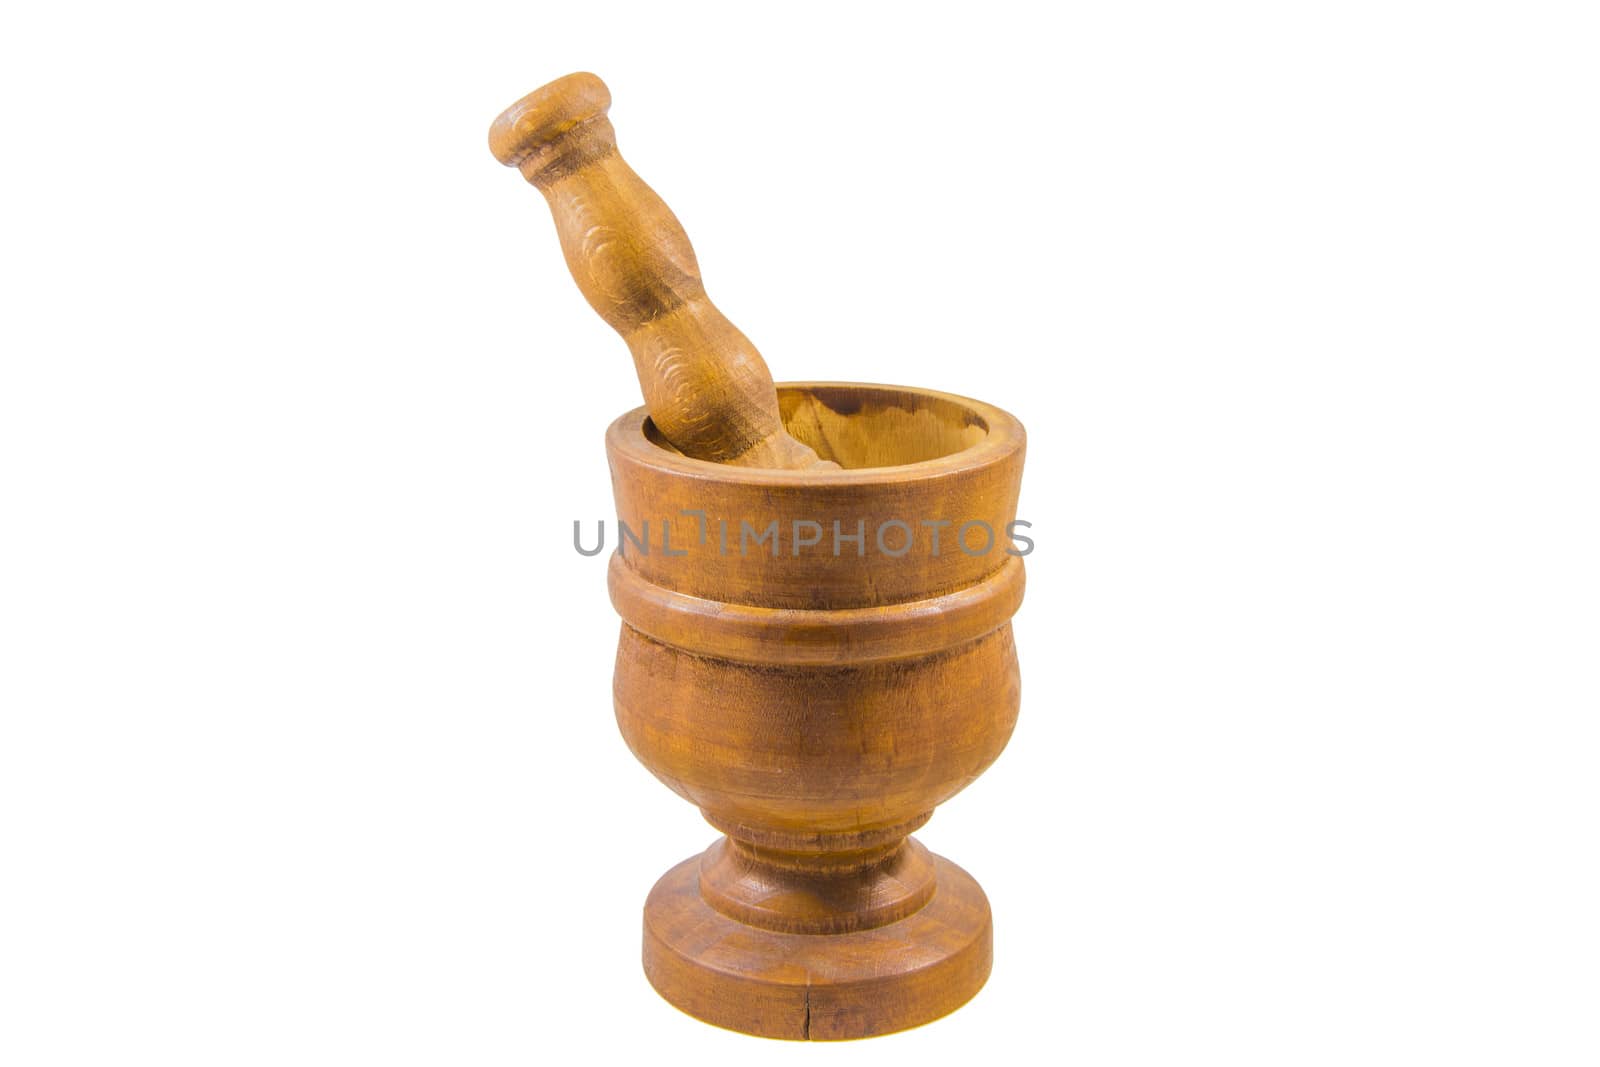 Antique Apothecary Wooden Mortar & Pestle by huntz